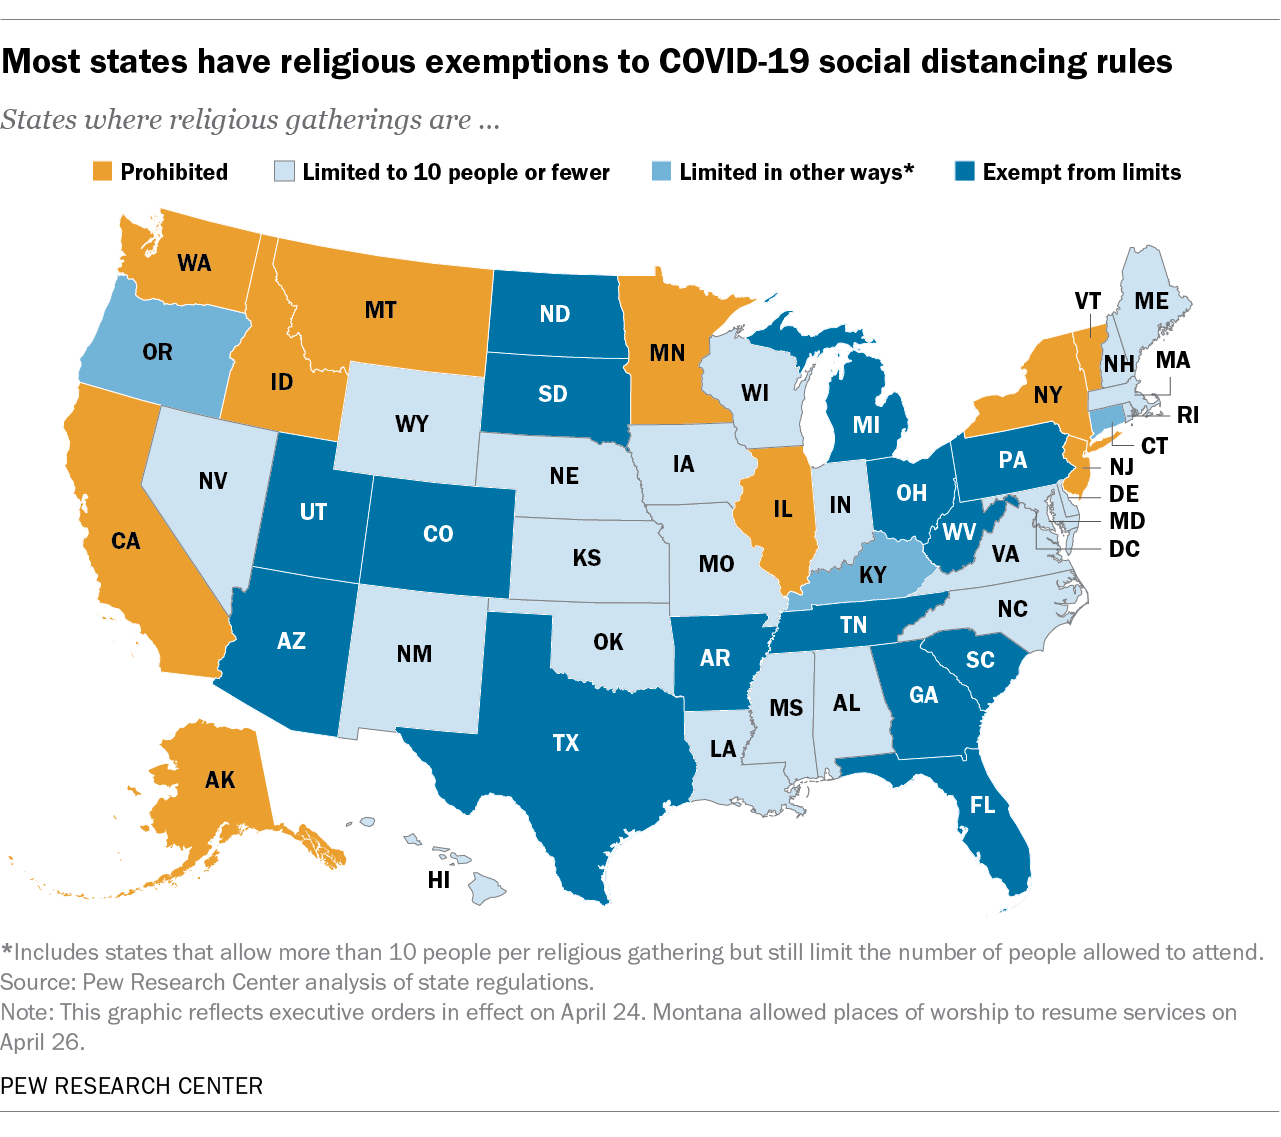 Most states have religious exemptions to COVID-19 social distancing rules